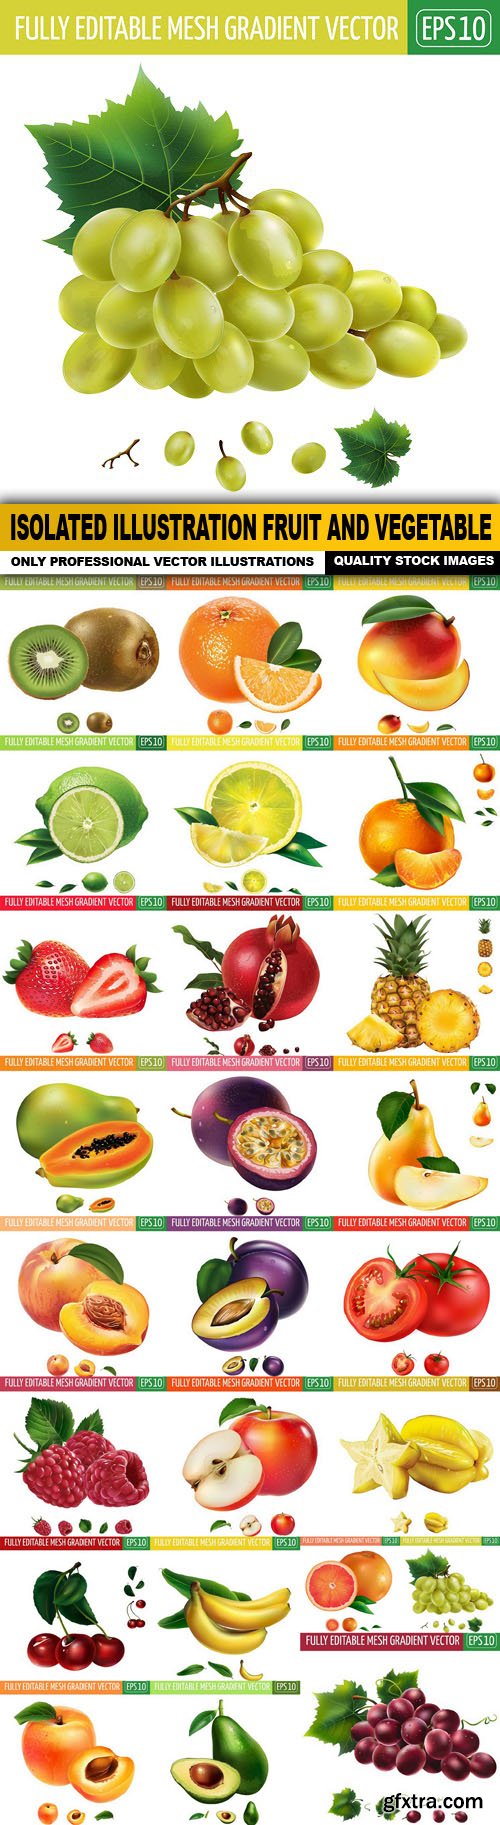 Isolated Illustration Fruit And Vegetable - 25 Vector